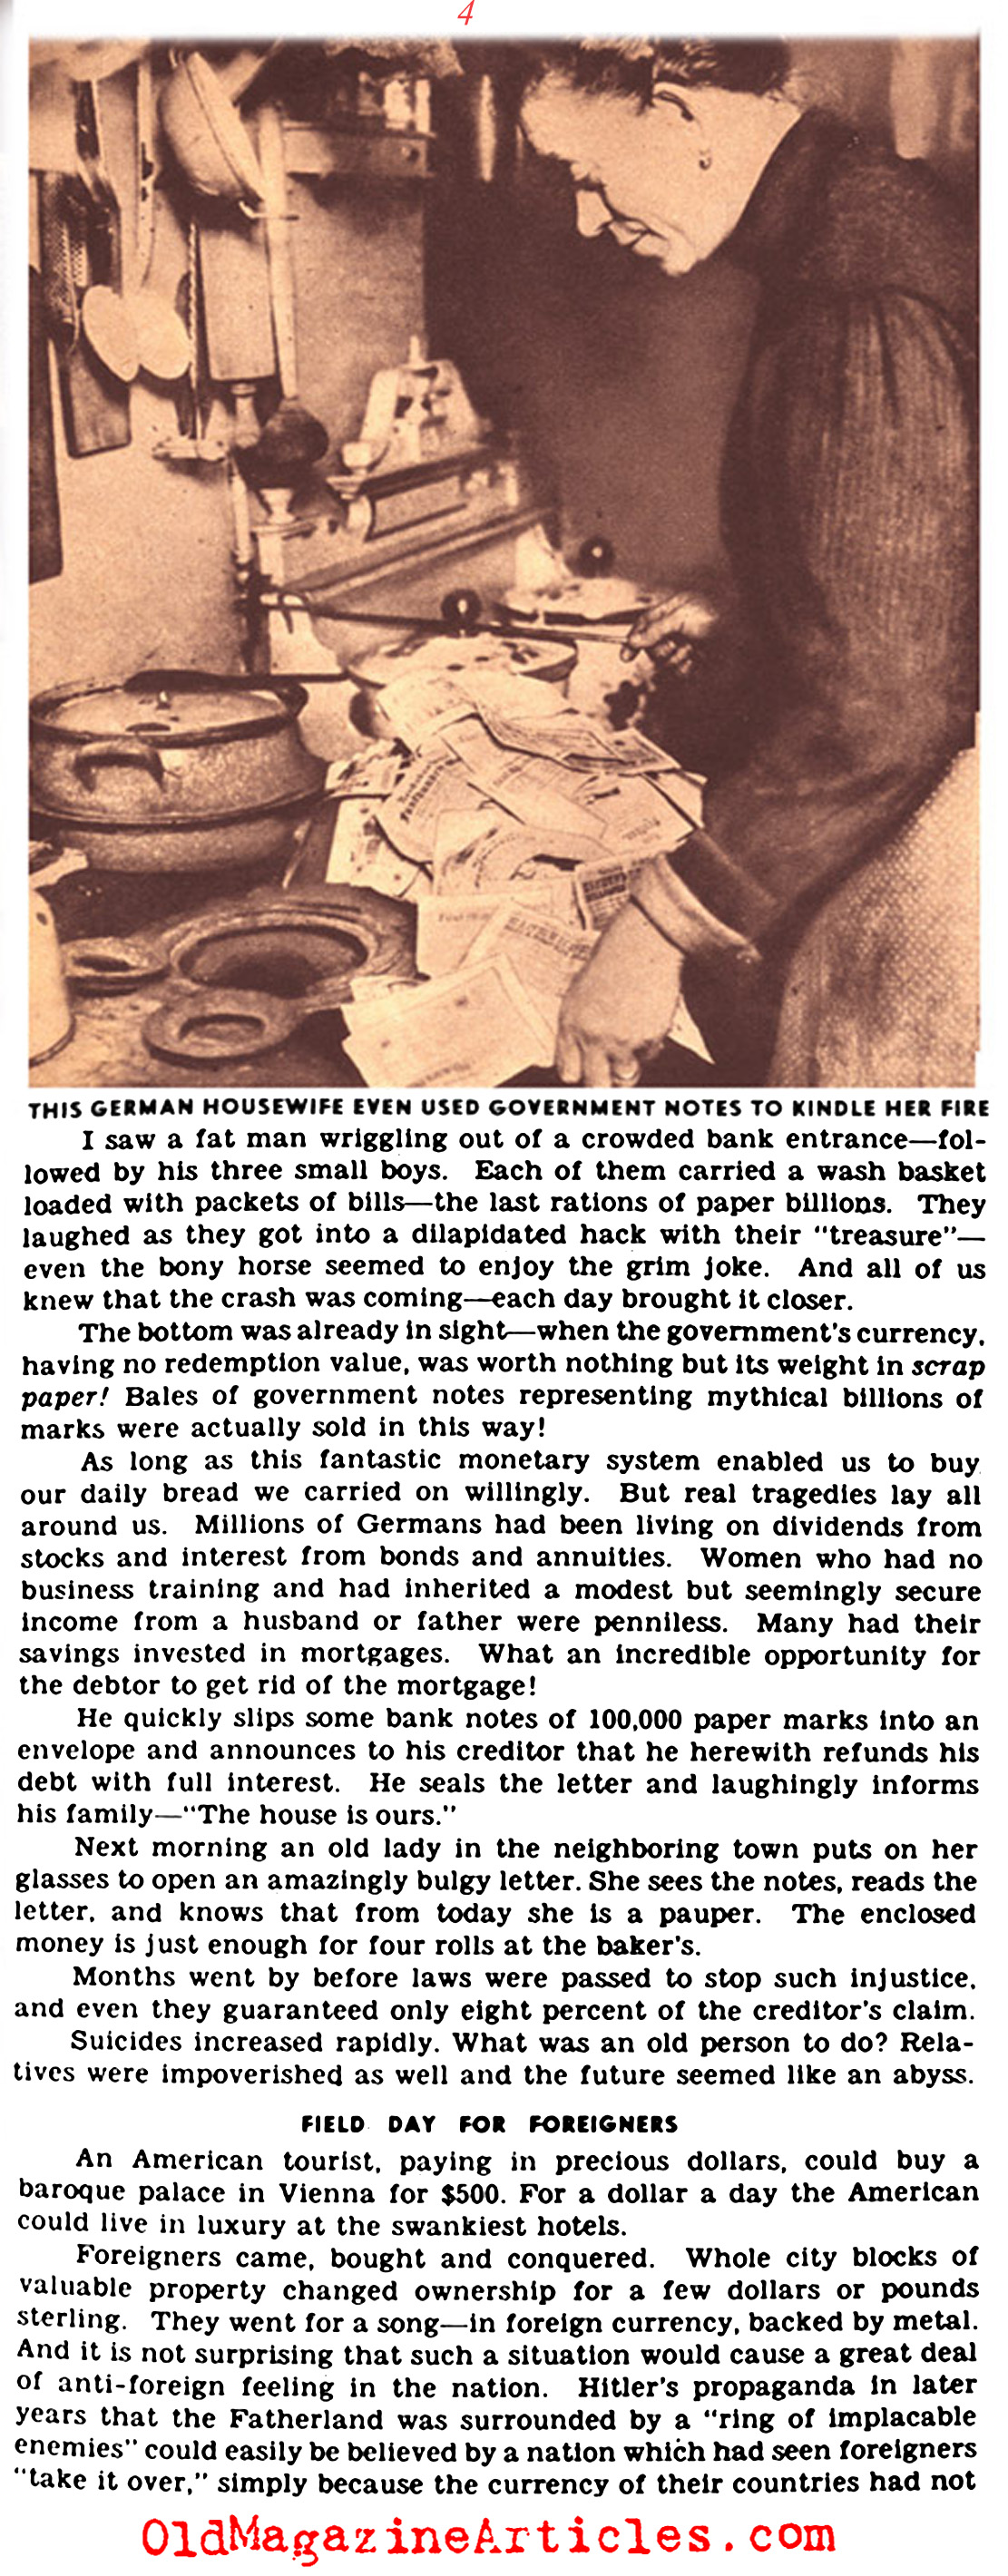 Rampant Inflation in Post-War Germany (Click Magazine, 1944)